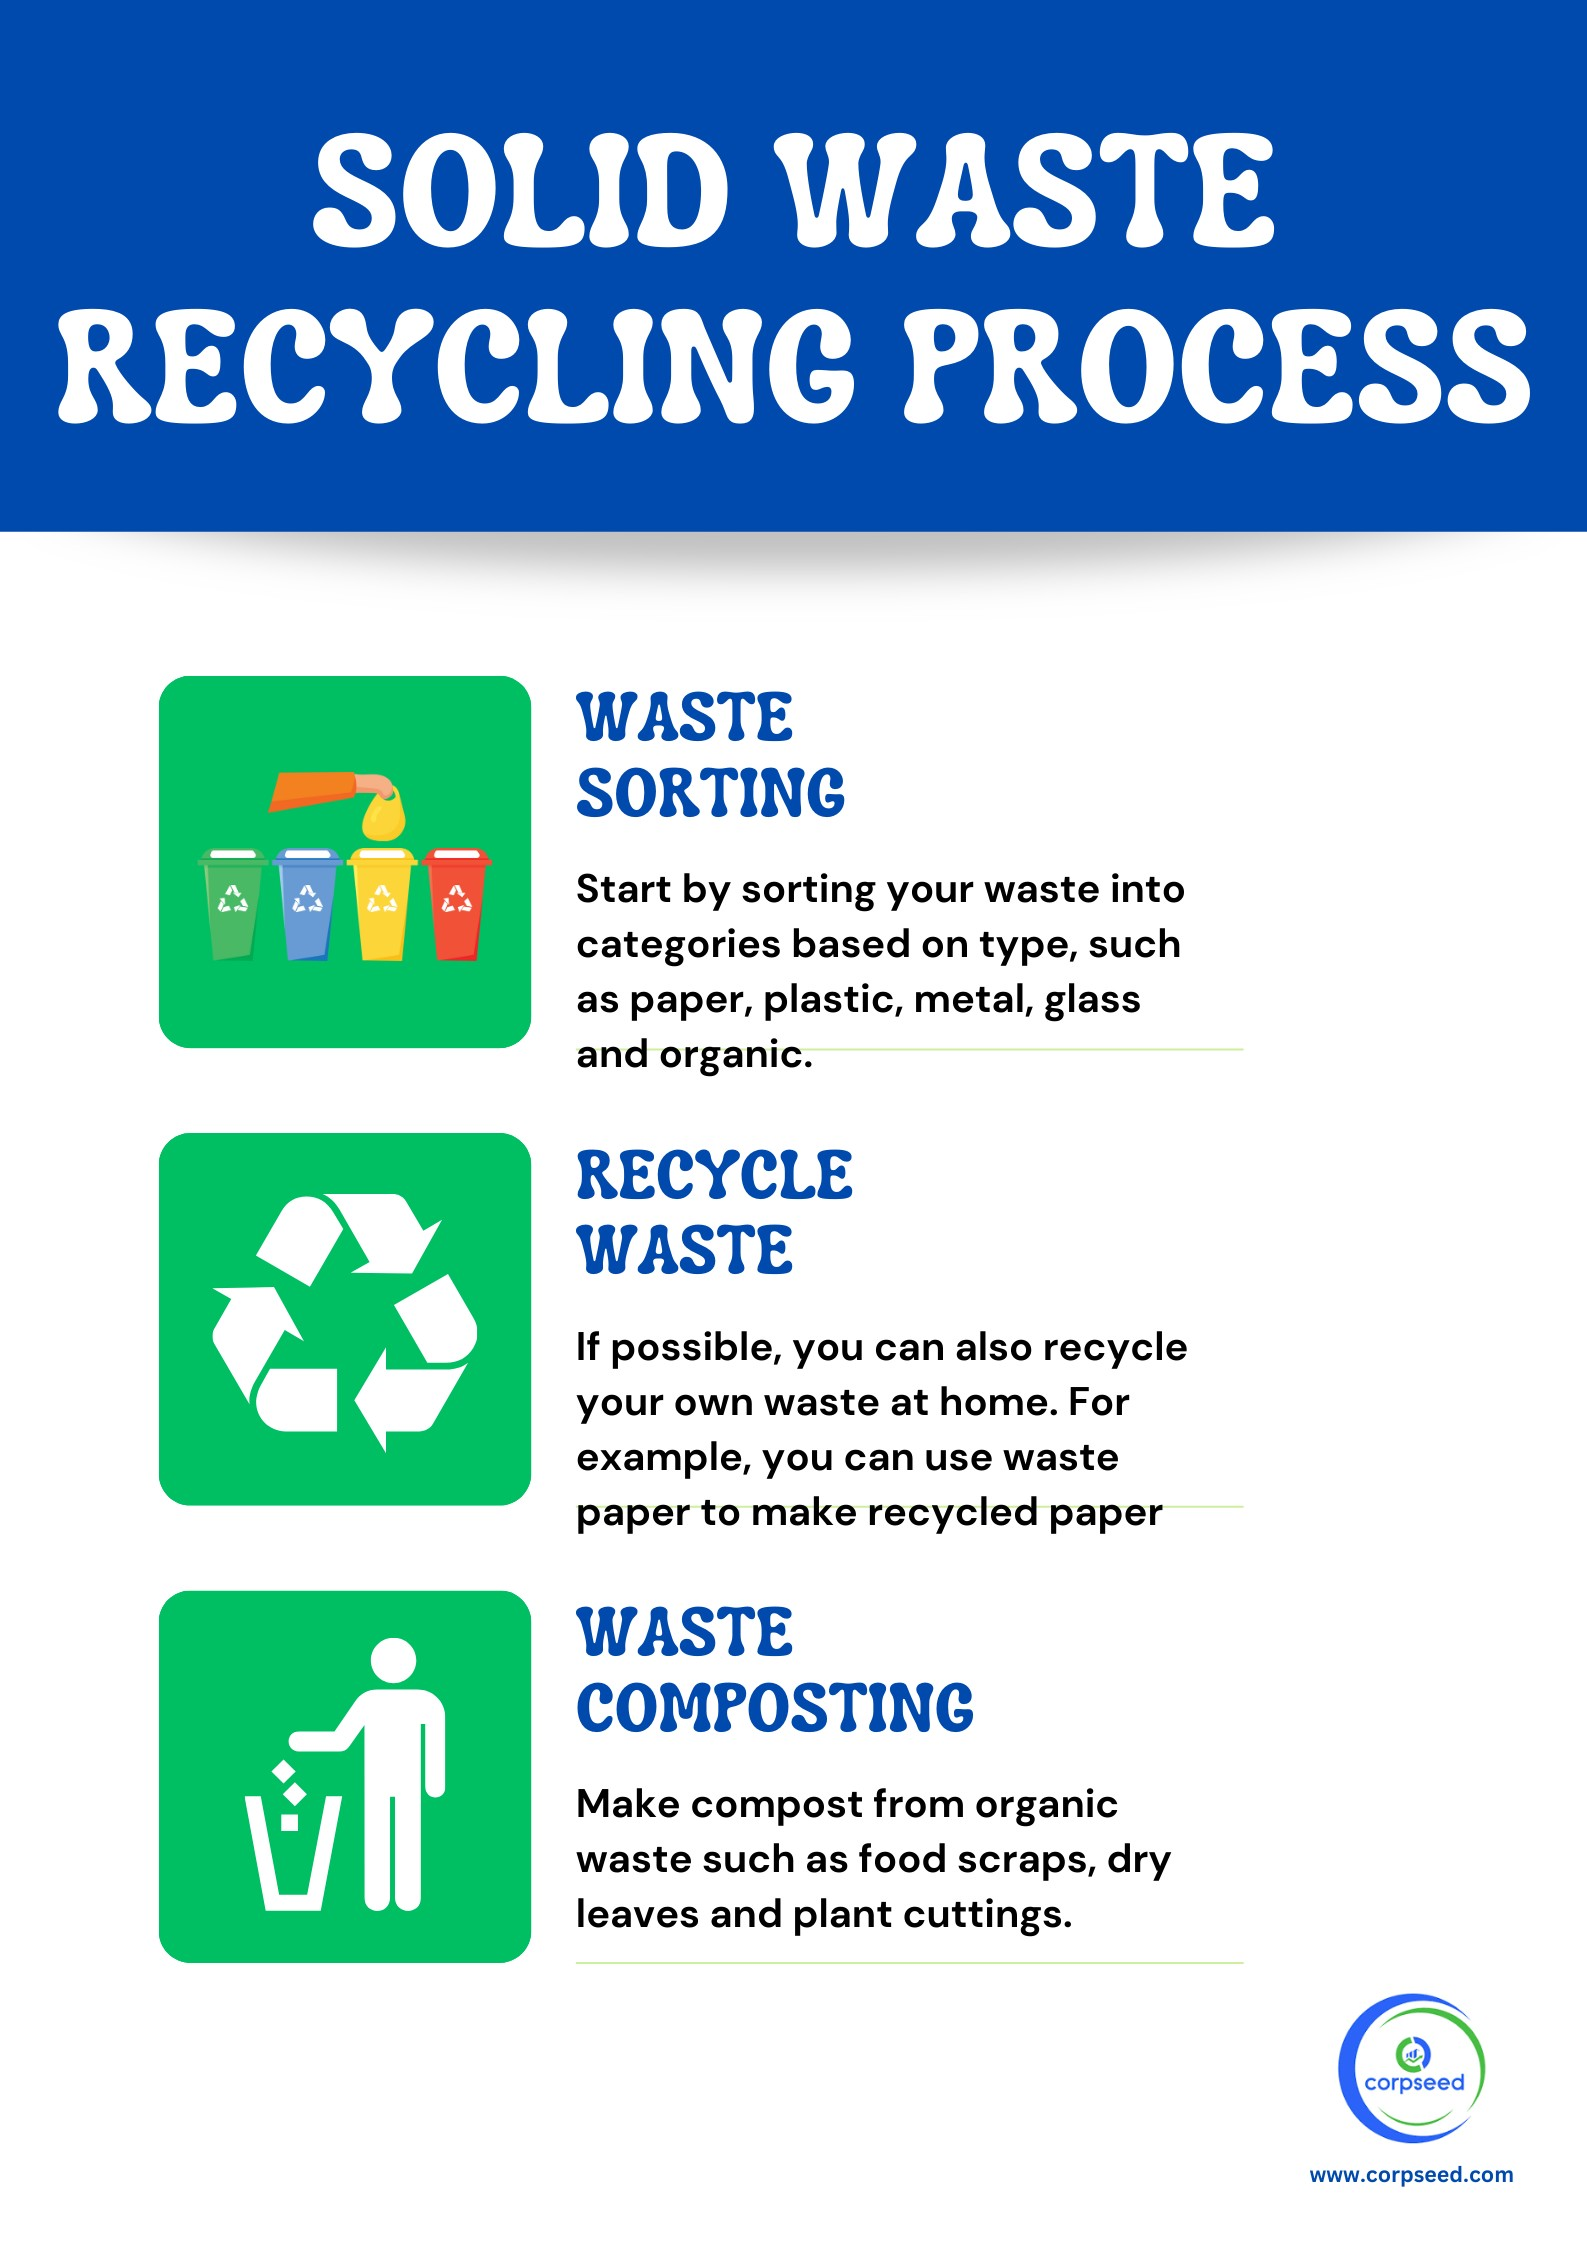 Solid waste recycling process